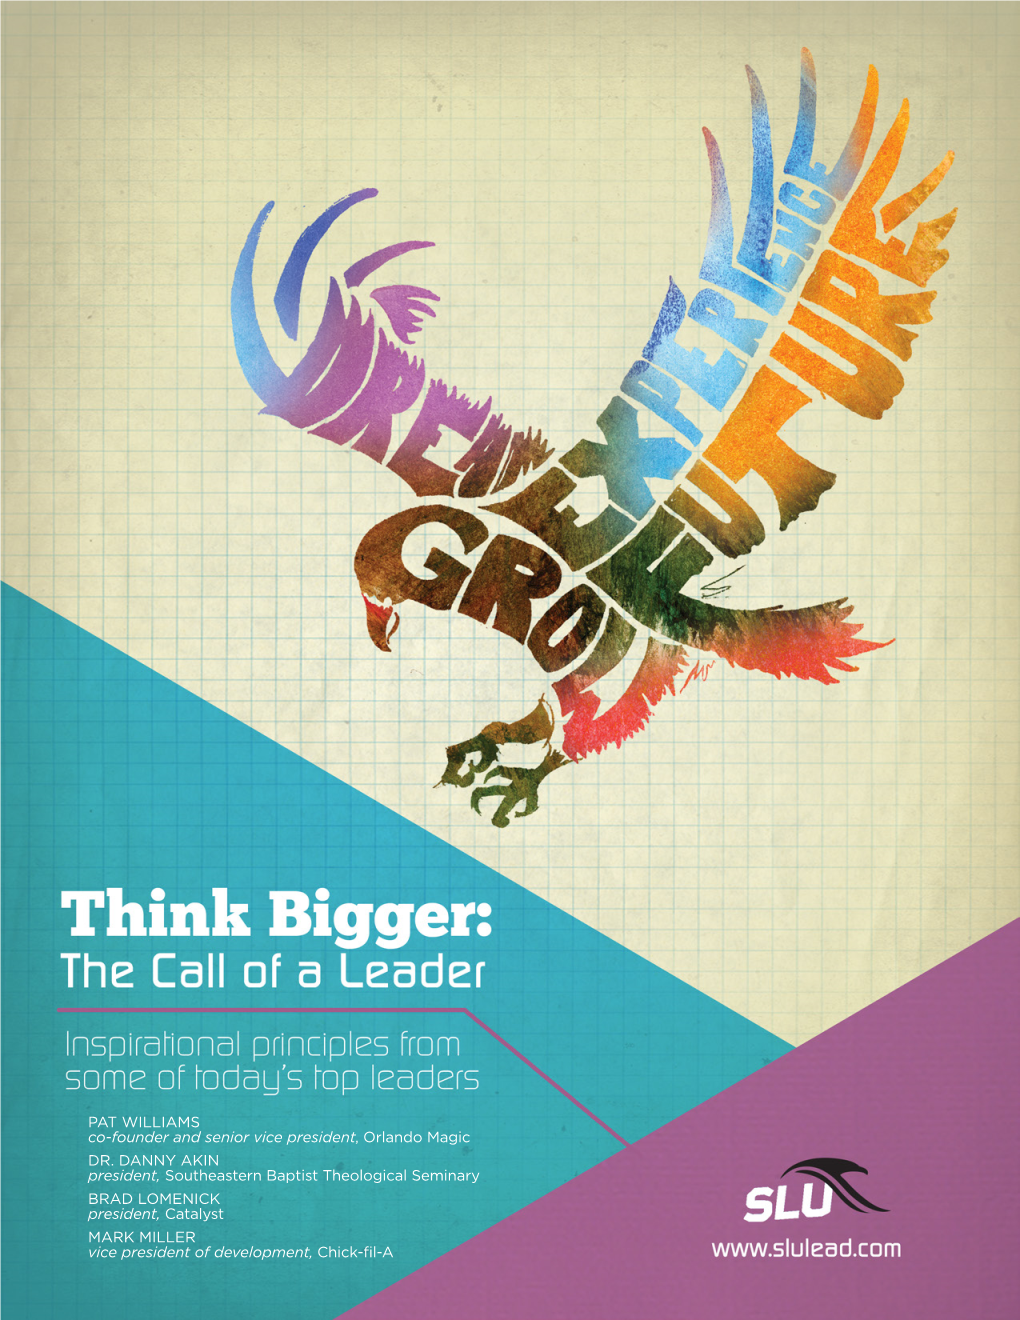 Think Bigger: the Call of a Leader [Subtitle] Inspirational Principles from Some of Today’S Top Leaders [Insert SLU Logo And